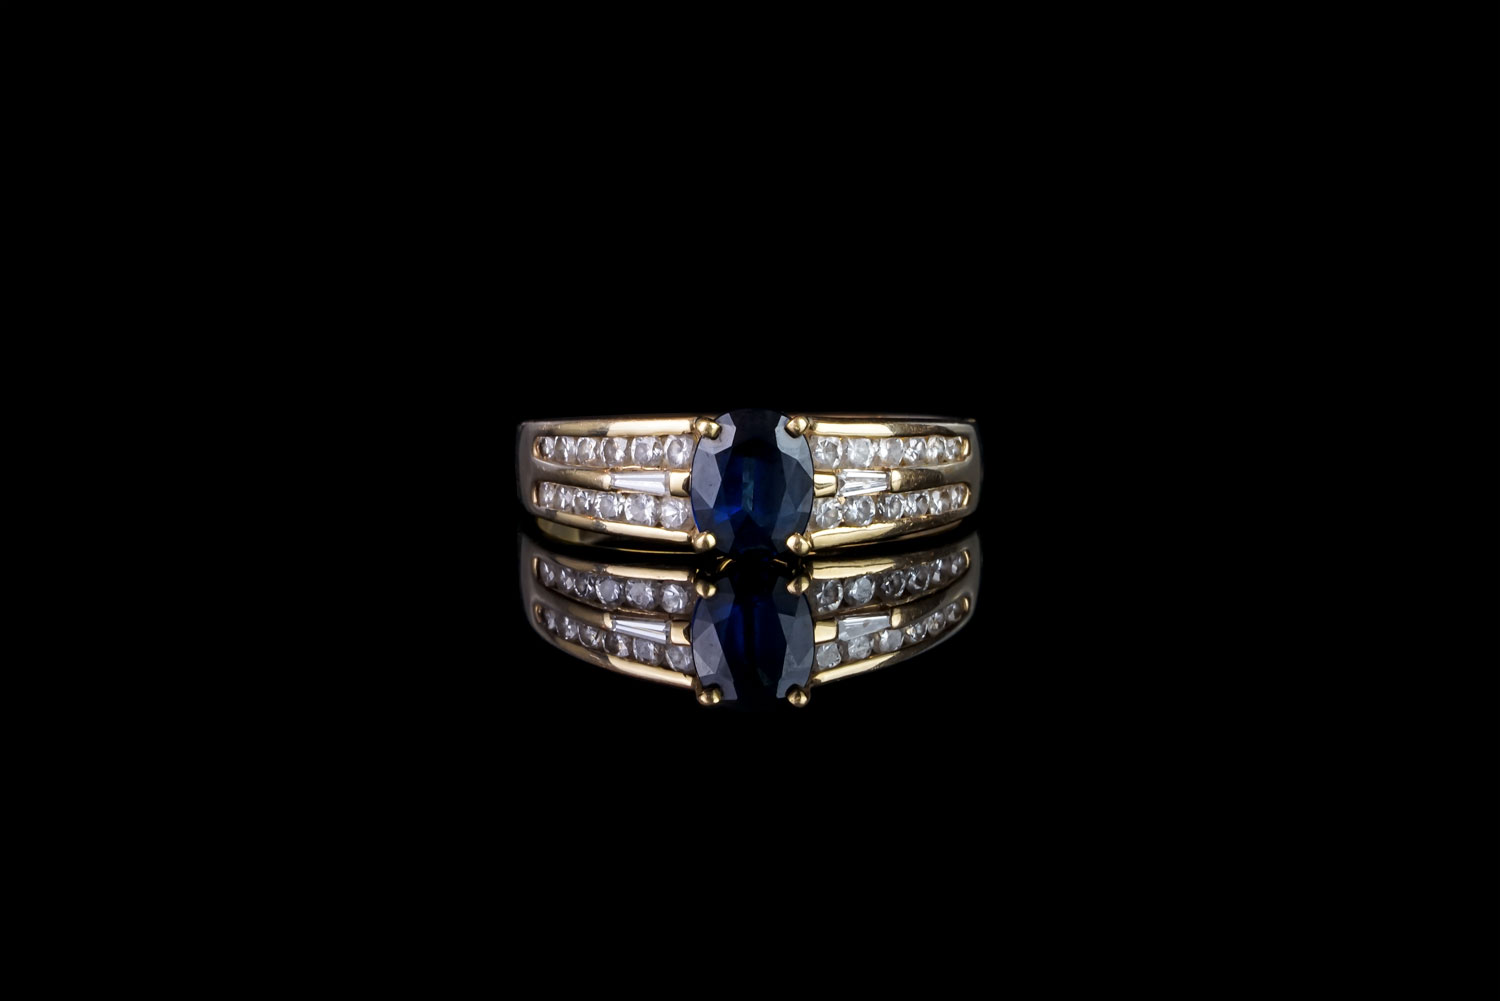 Sapphire and diamond ring, 1 sapphire in the centre, 4 claw set, 2 baguette cut diamonds either